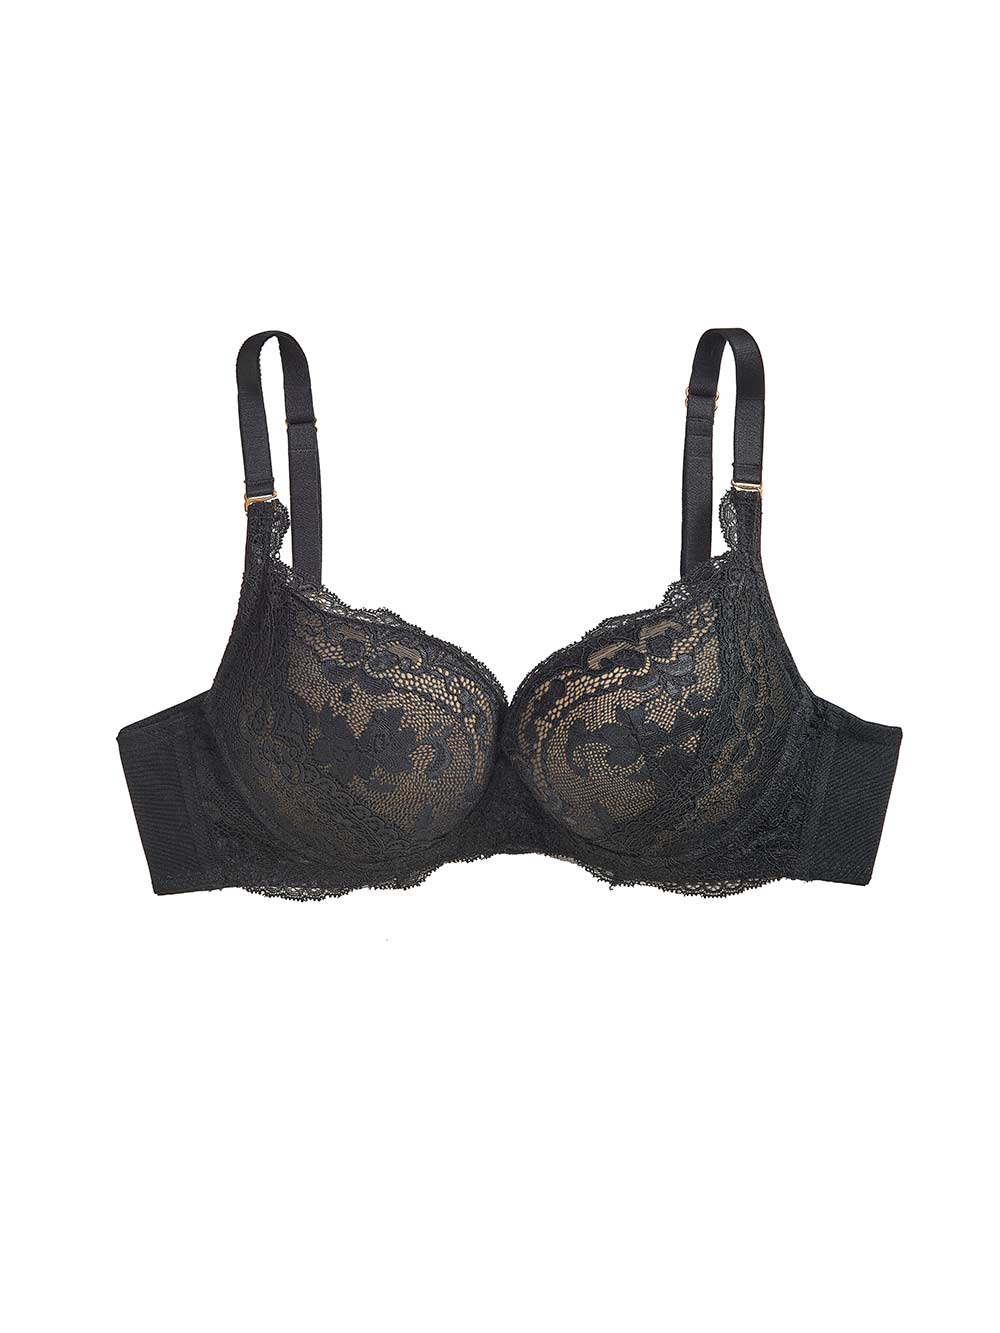 New Ex M&S Louisa Lace Non-Padded Non-Wired Full Cup Bra Size 38B Black